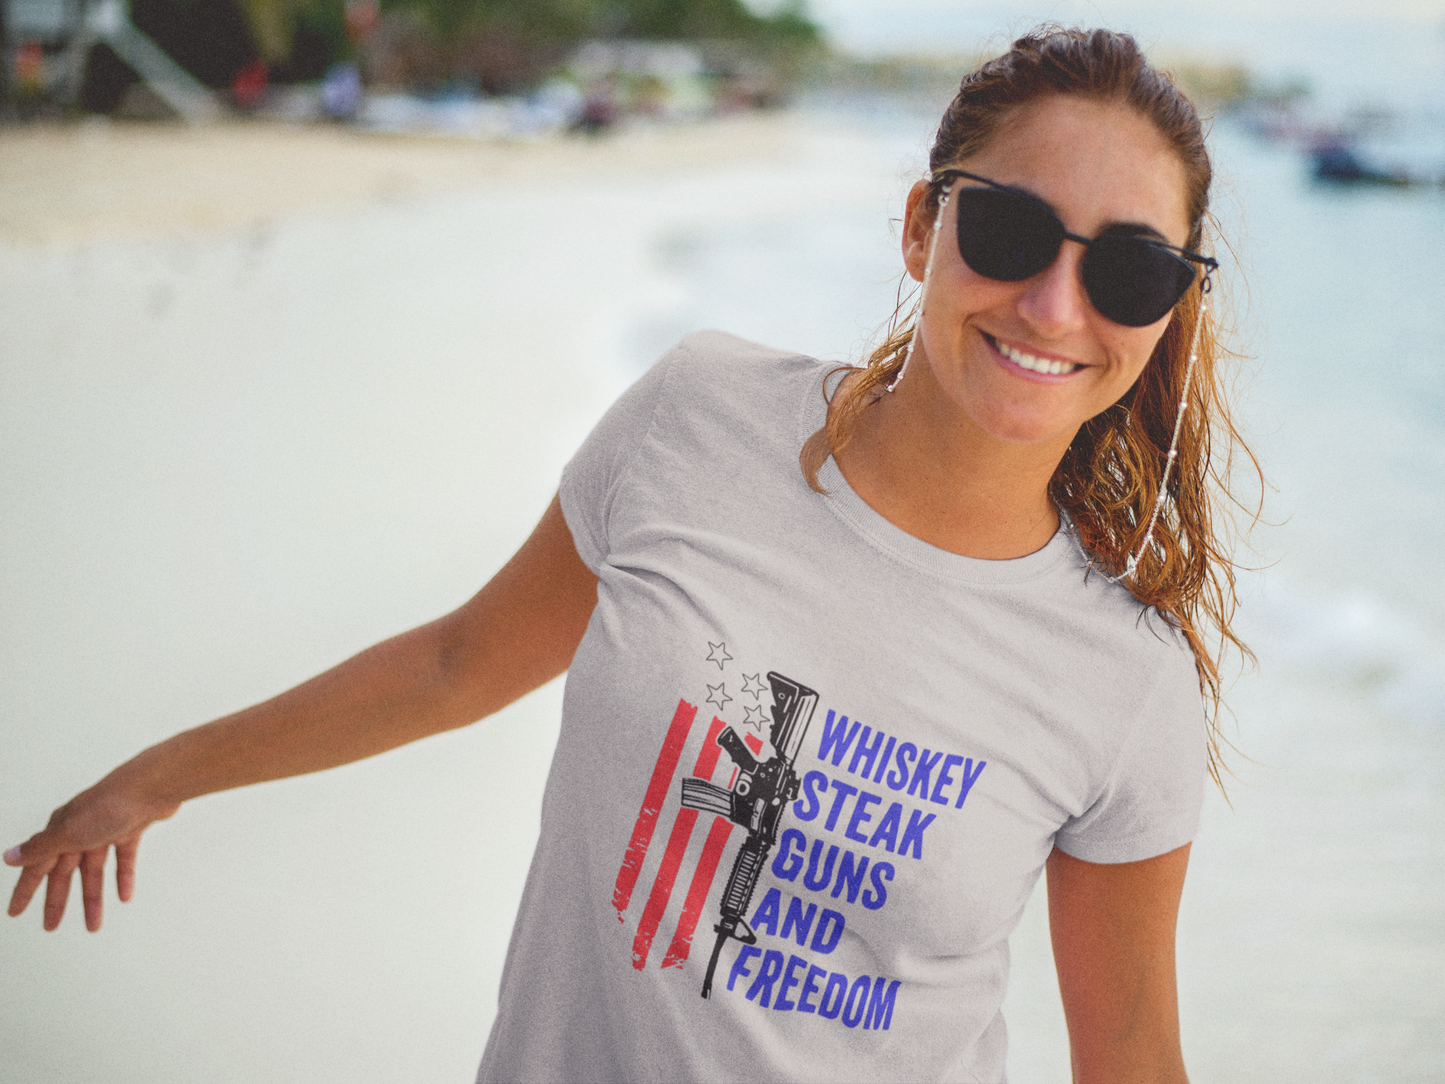 Whiskey, Steak, Guns, and Freedom Red, White, and Blue T-Shirt